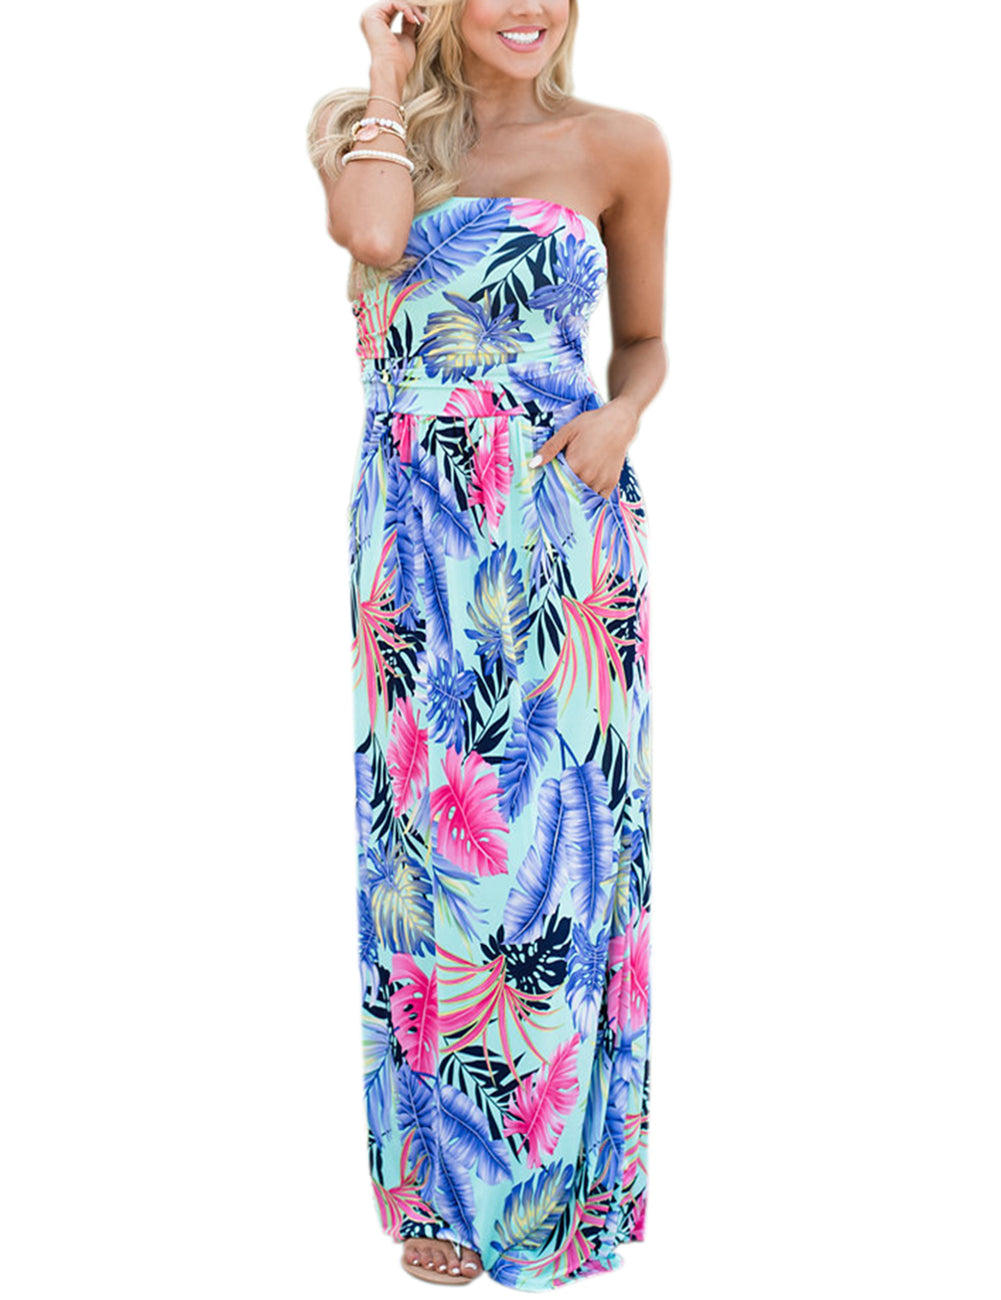 YESFASHION Women's Strapless Backless Summer Tropical Dress